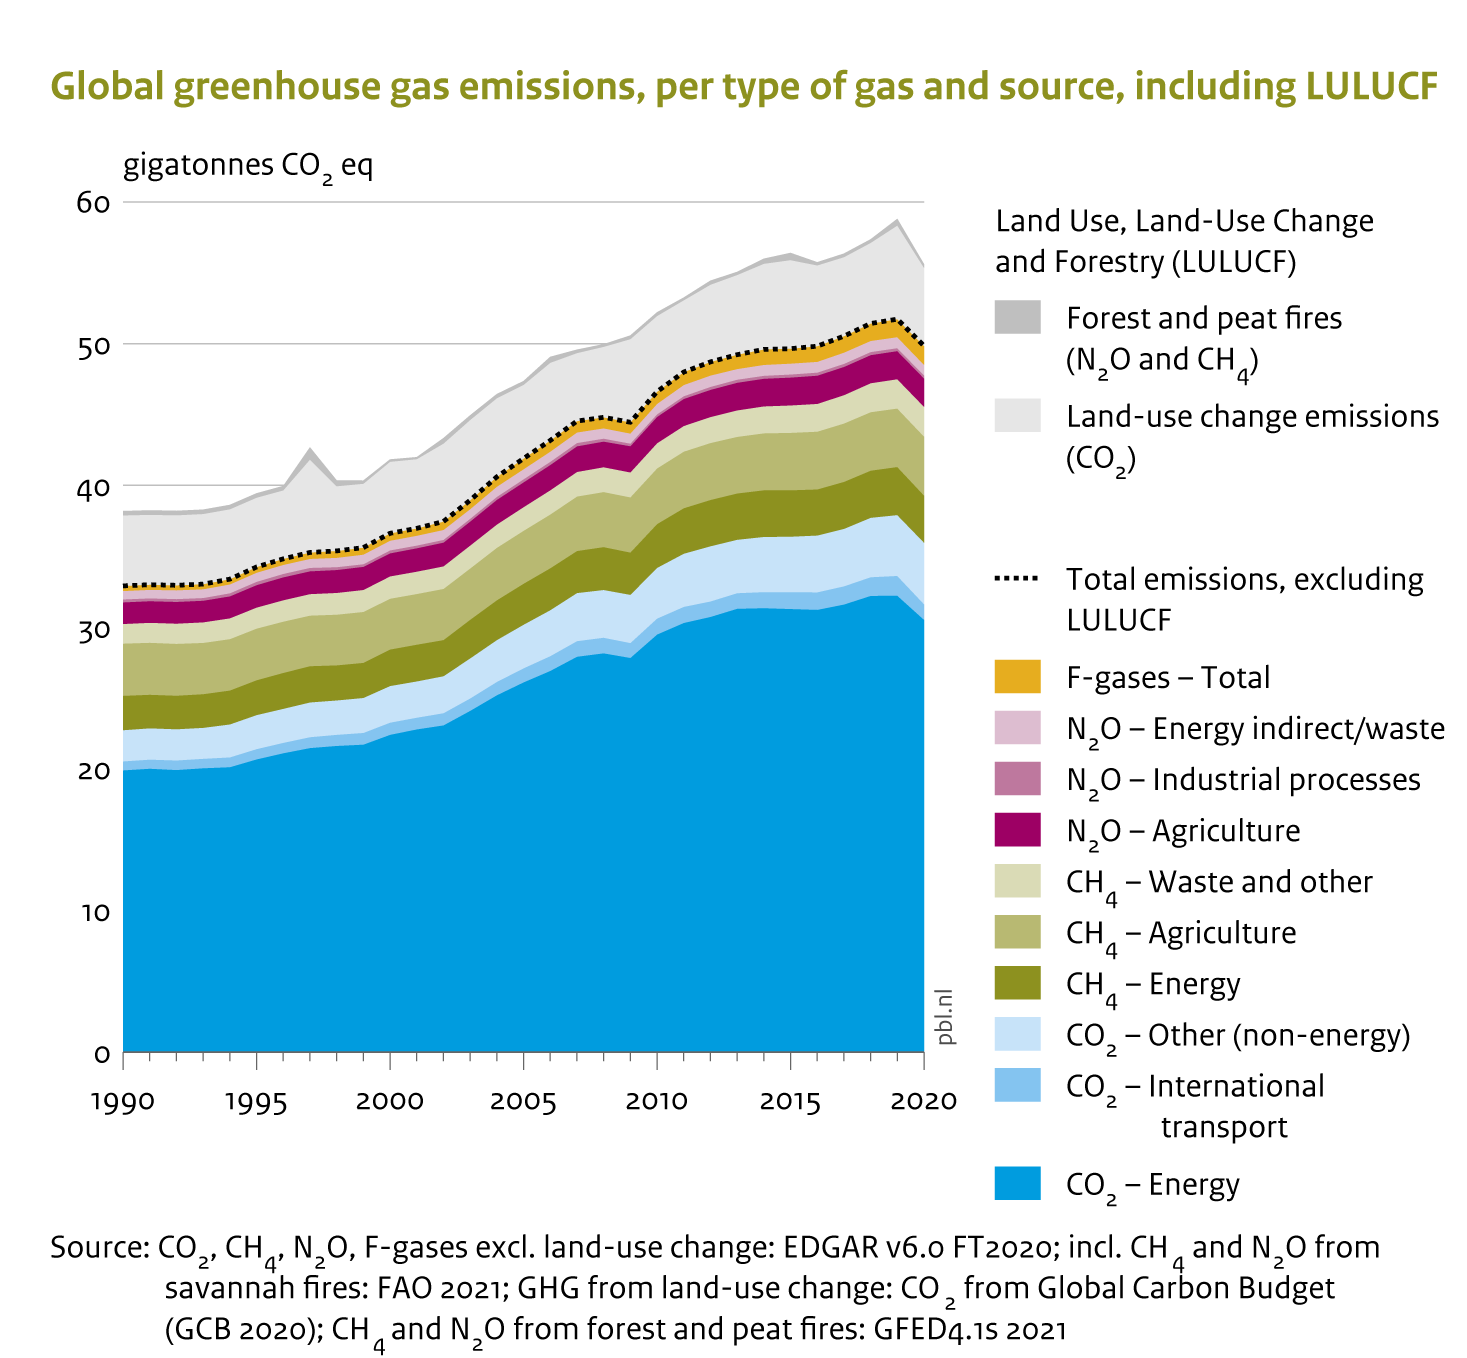 In 2020, global GHG emissions mostly consisted of CO2 (about 72%, excluding land-use change), other significant shares are from methane (CH4), nitrous oxide (N2O) and fluorinated gases (F-gases) with 19%, 6% and 2.7%, respectively.